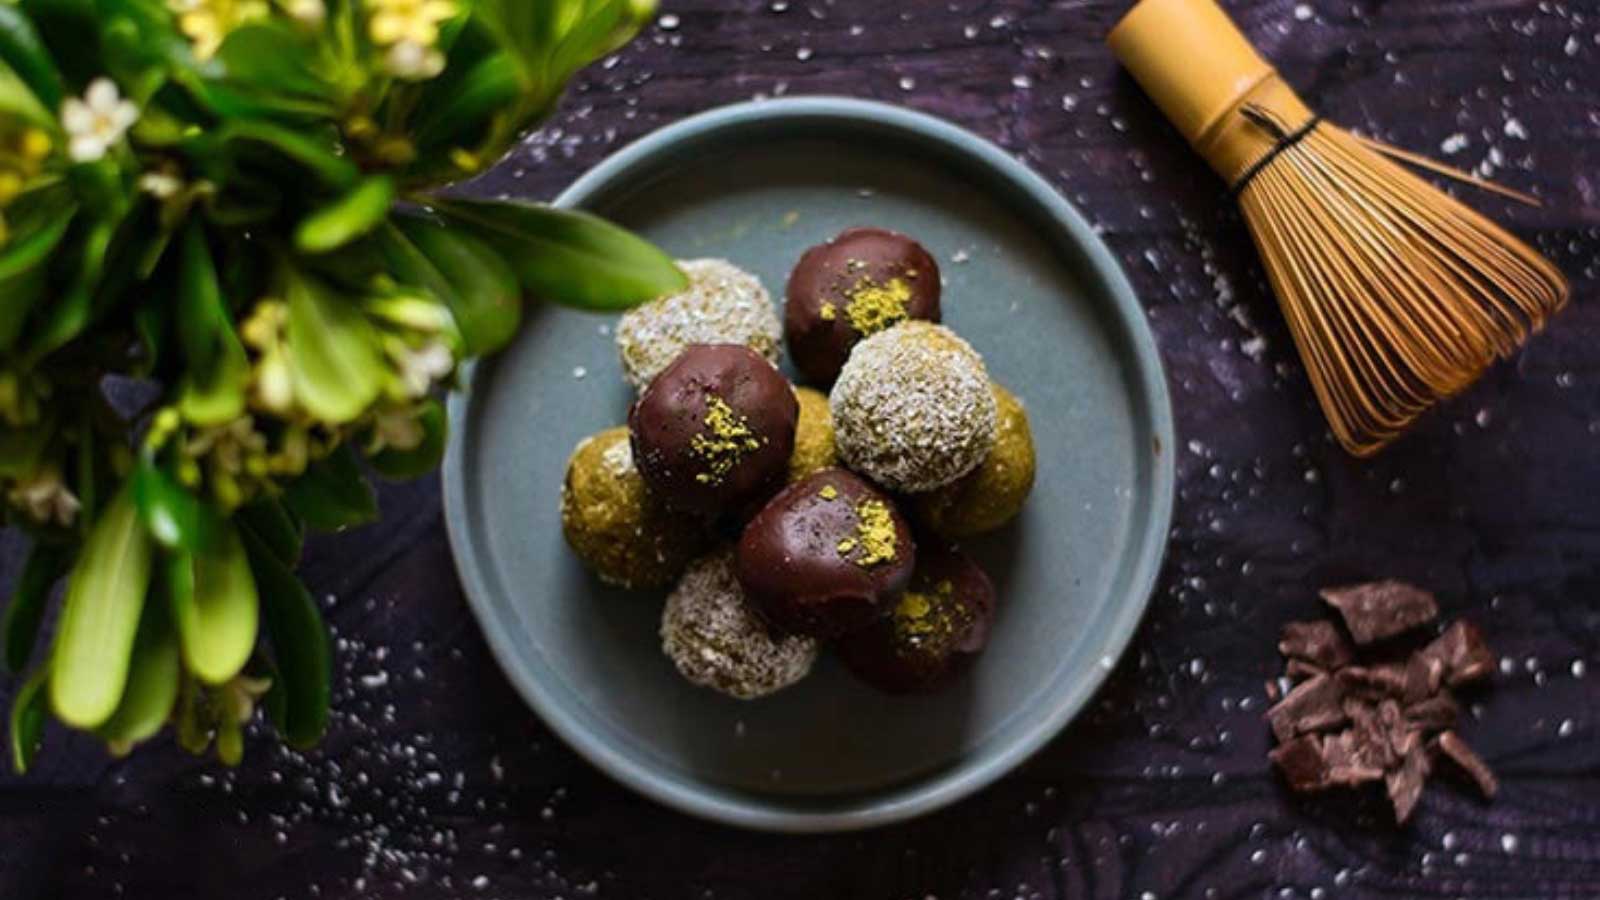 <p>These tasty <a href="https://www.thegraciouspantry.com/matcha-energy-balls-recipe/">matcha energy balls </a>are good for you, and they can give you a quick energy boost, too. These are made with avocado, maple syrup, matcha powder, dark chocolate, and a few other simple ingredients for a road-worthy snack you’ll love. They DO contain caffeine, so keep that in mind if you are traveling with kids. </p>